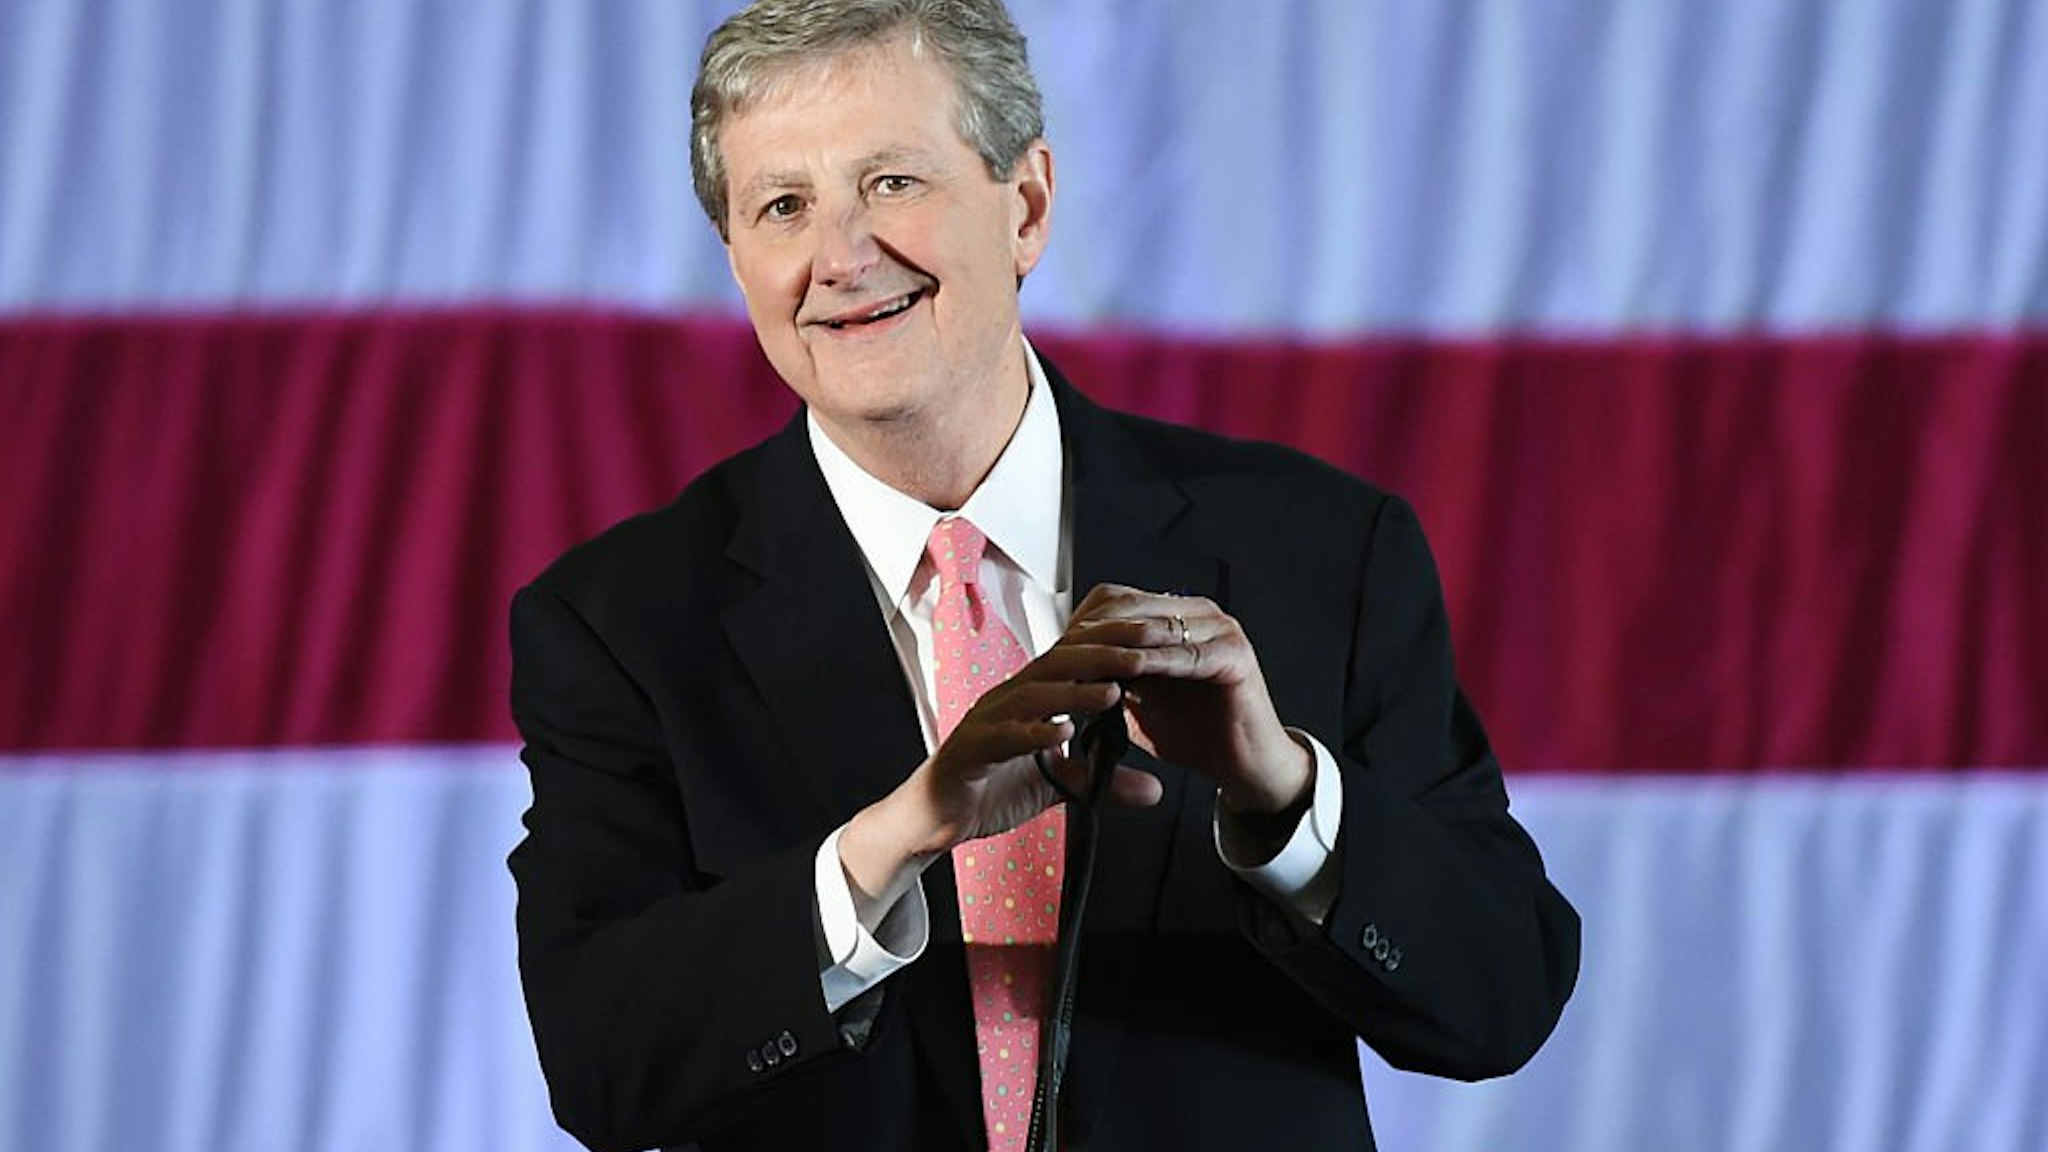 John Kennedy speaks at a get-out-the-vote rally on December 9, 2016